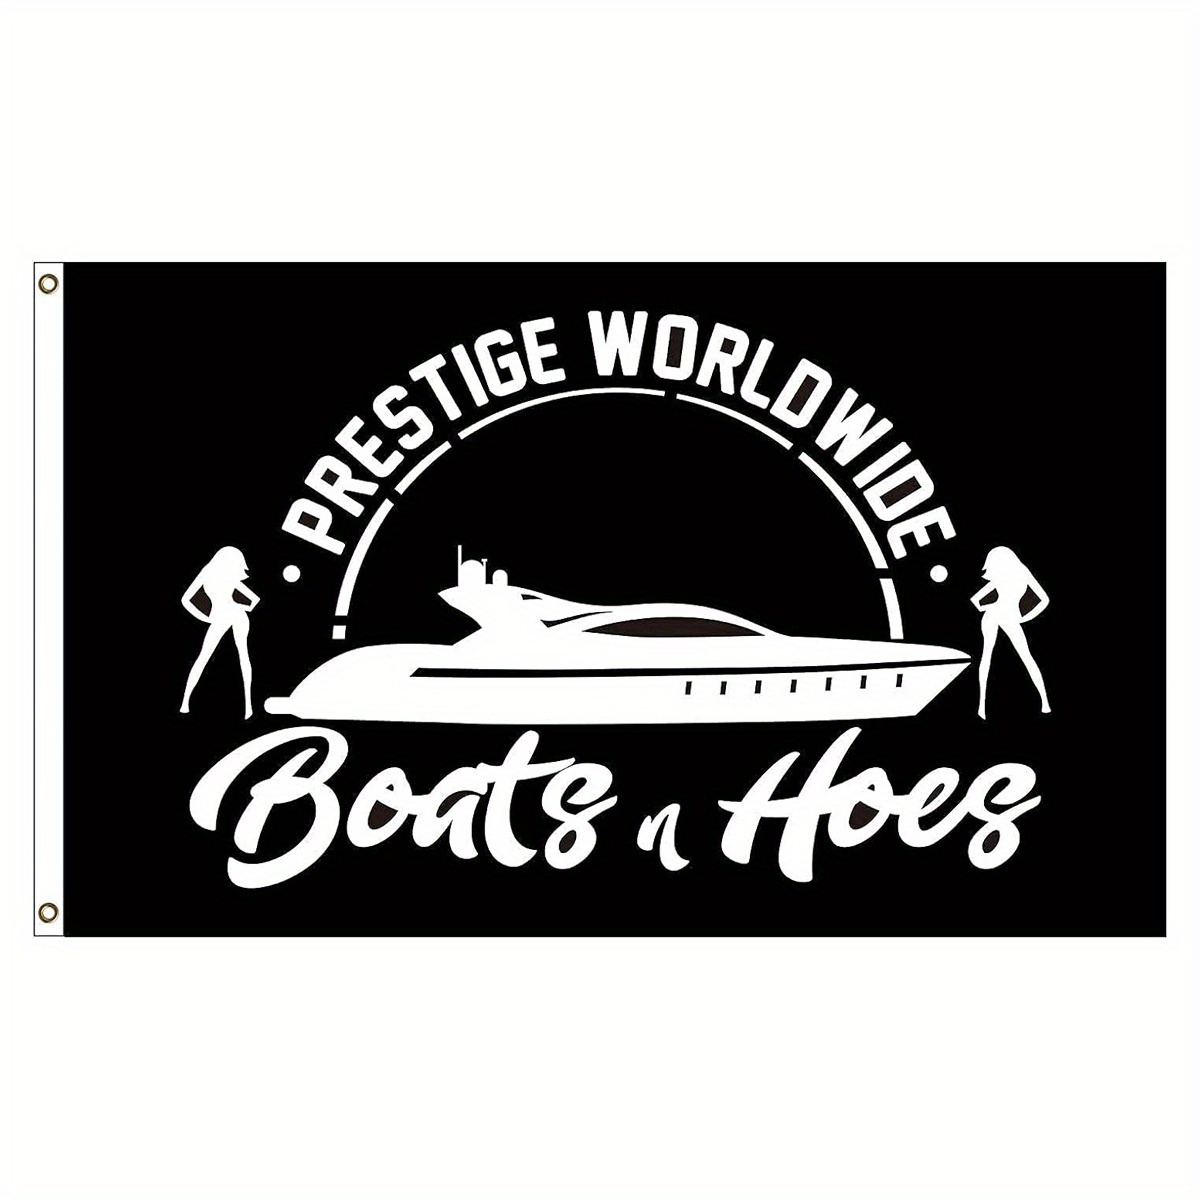 Prestige Worldwide Boats and Hoe Flag 3ft x 5ft Malibu Boats N Hooks Flag  Banner with 2 Brass Eyelets Funny Flags for Men Boat College Room Teenager